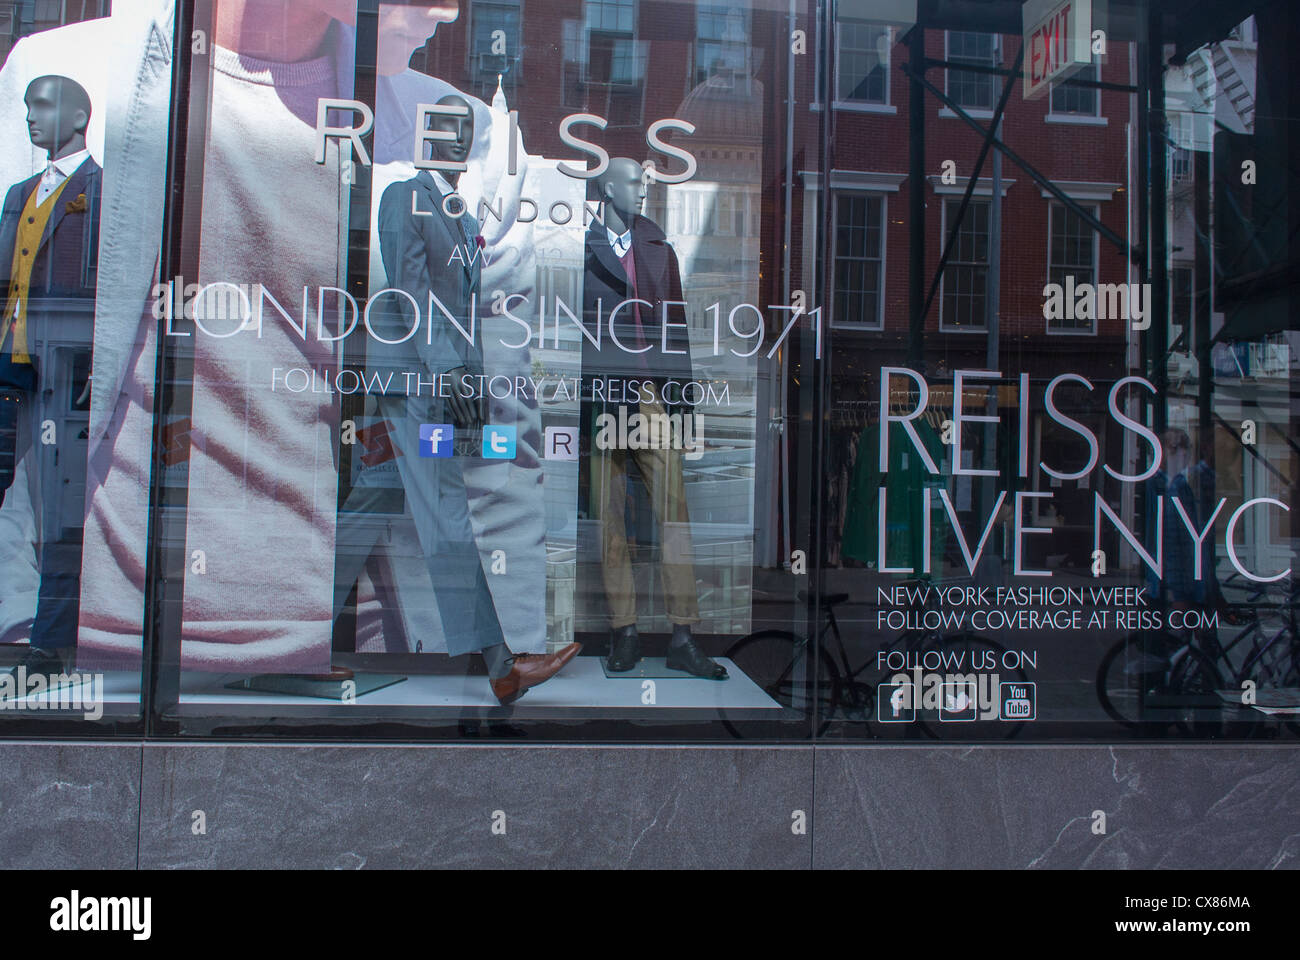 New York, NY, USA, magasins de mode, Reiss Shop, Shopping à Greenwich Village, Store Front Window, Sign Banque D'Images